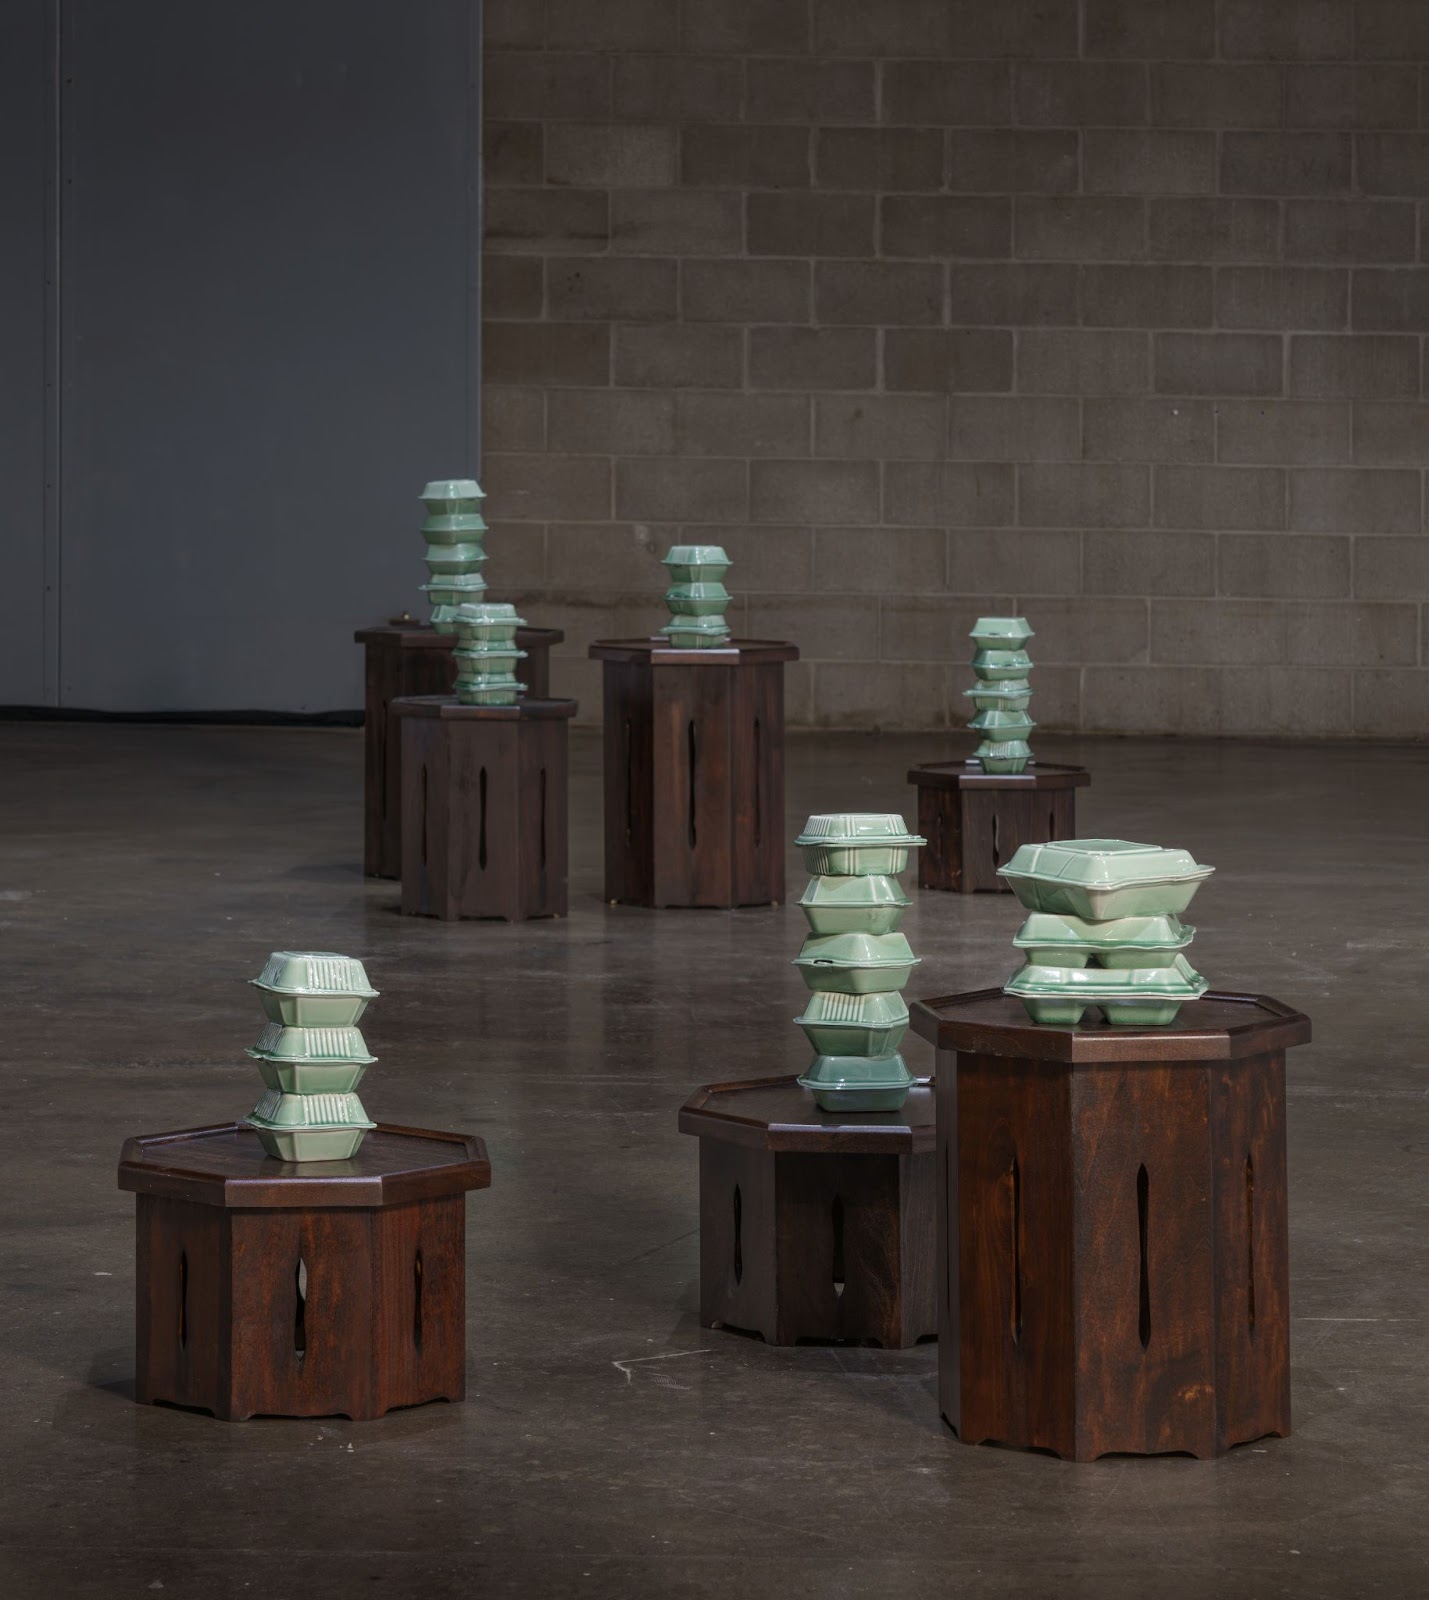 Image: Installation view, Yoonmi Nam, Generally Meant to be Discarded. Slip cast exteriors from the Cairn series are displayed on the soban pedestals. Image courtesy of the artist, photo by E.G. Schempf